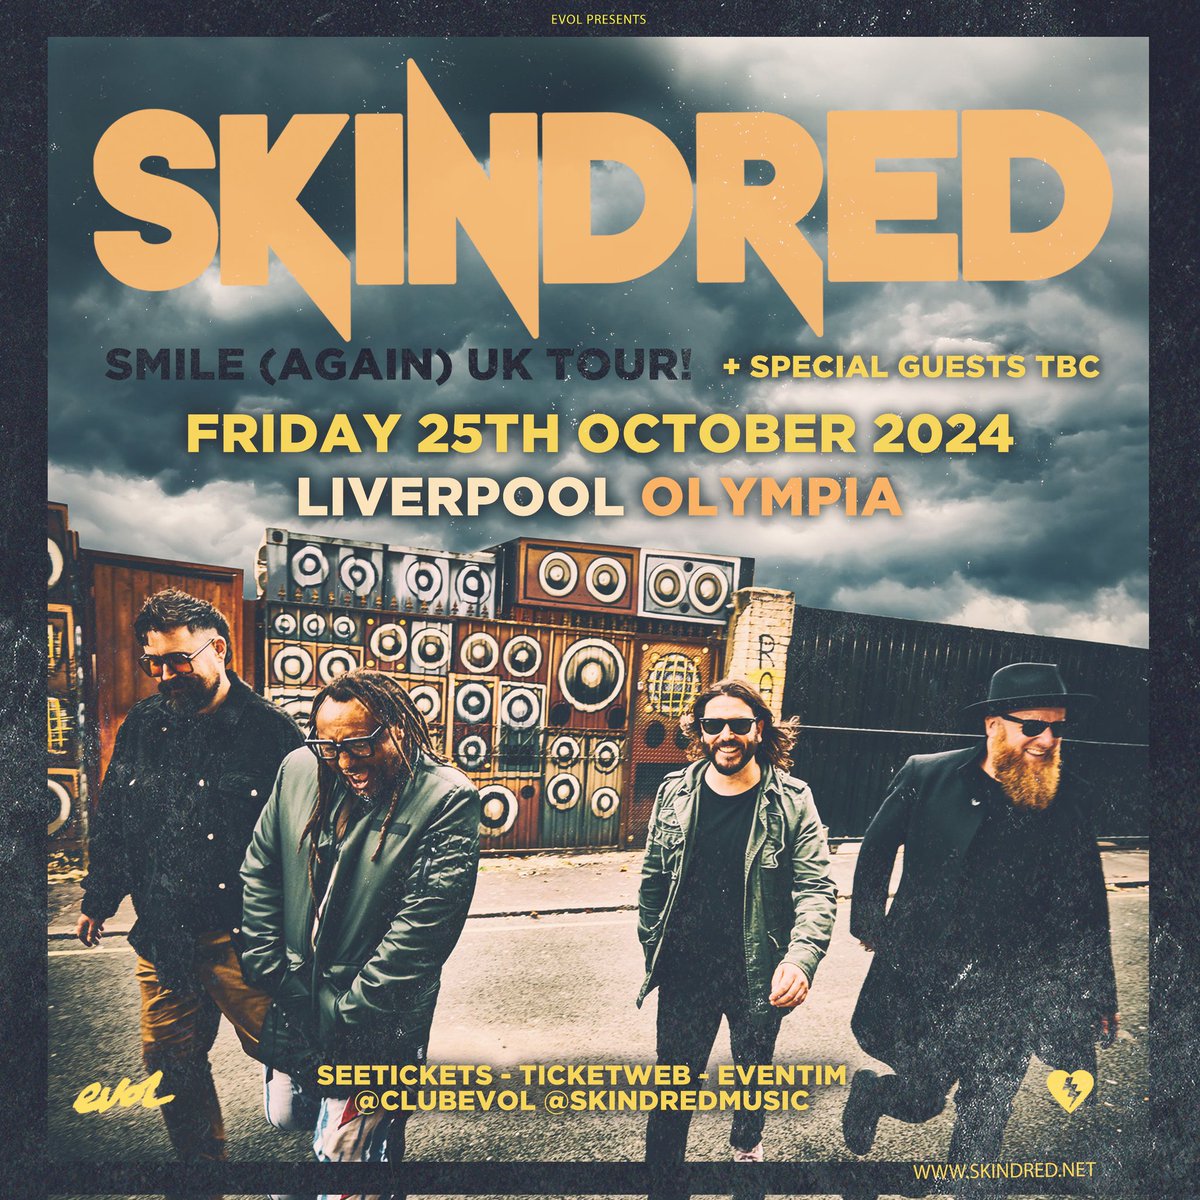 𝐒𝐄𝐋𝐋𝐈𝐍𝐆 𝐅𝐀𝐒𝐓 Over 25 years and eight studio albums in, one of the UK's most exciting live acts, @MOBOAwards-winning @Skindredmusic return to the Liverpool live stage, Friday October 25th @LpoolOlympia! Tickets selling fast! Bust a move! 👇 seetickets.com/event/skindred…